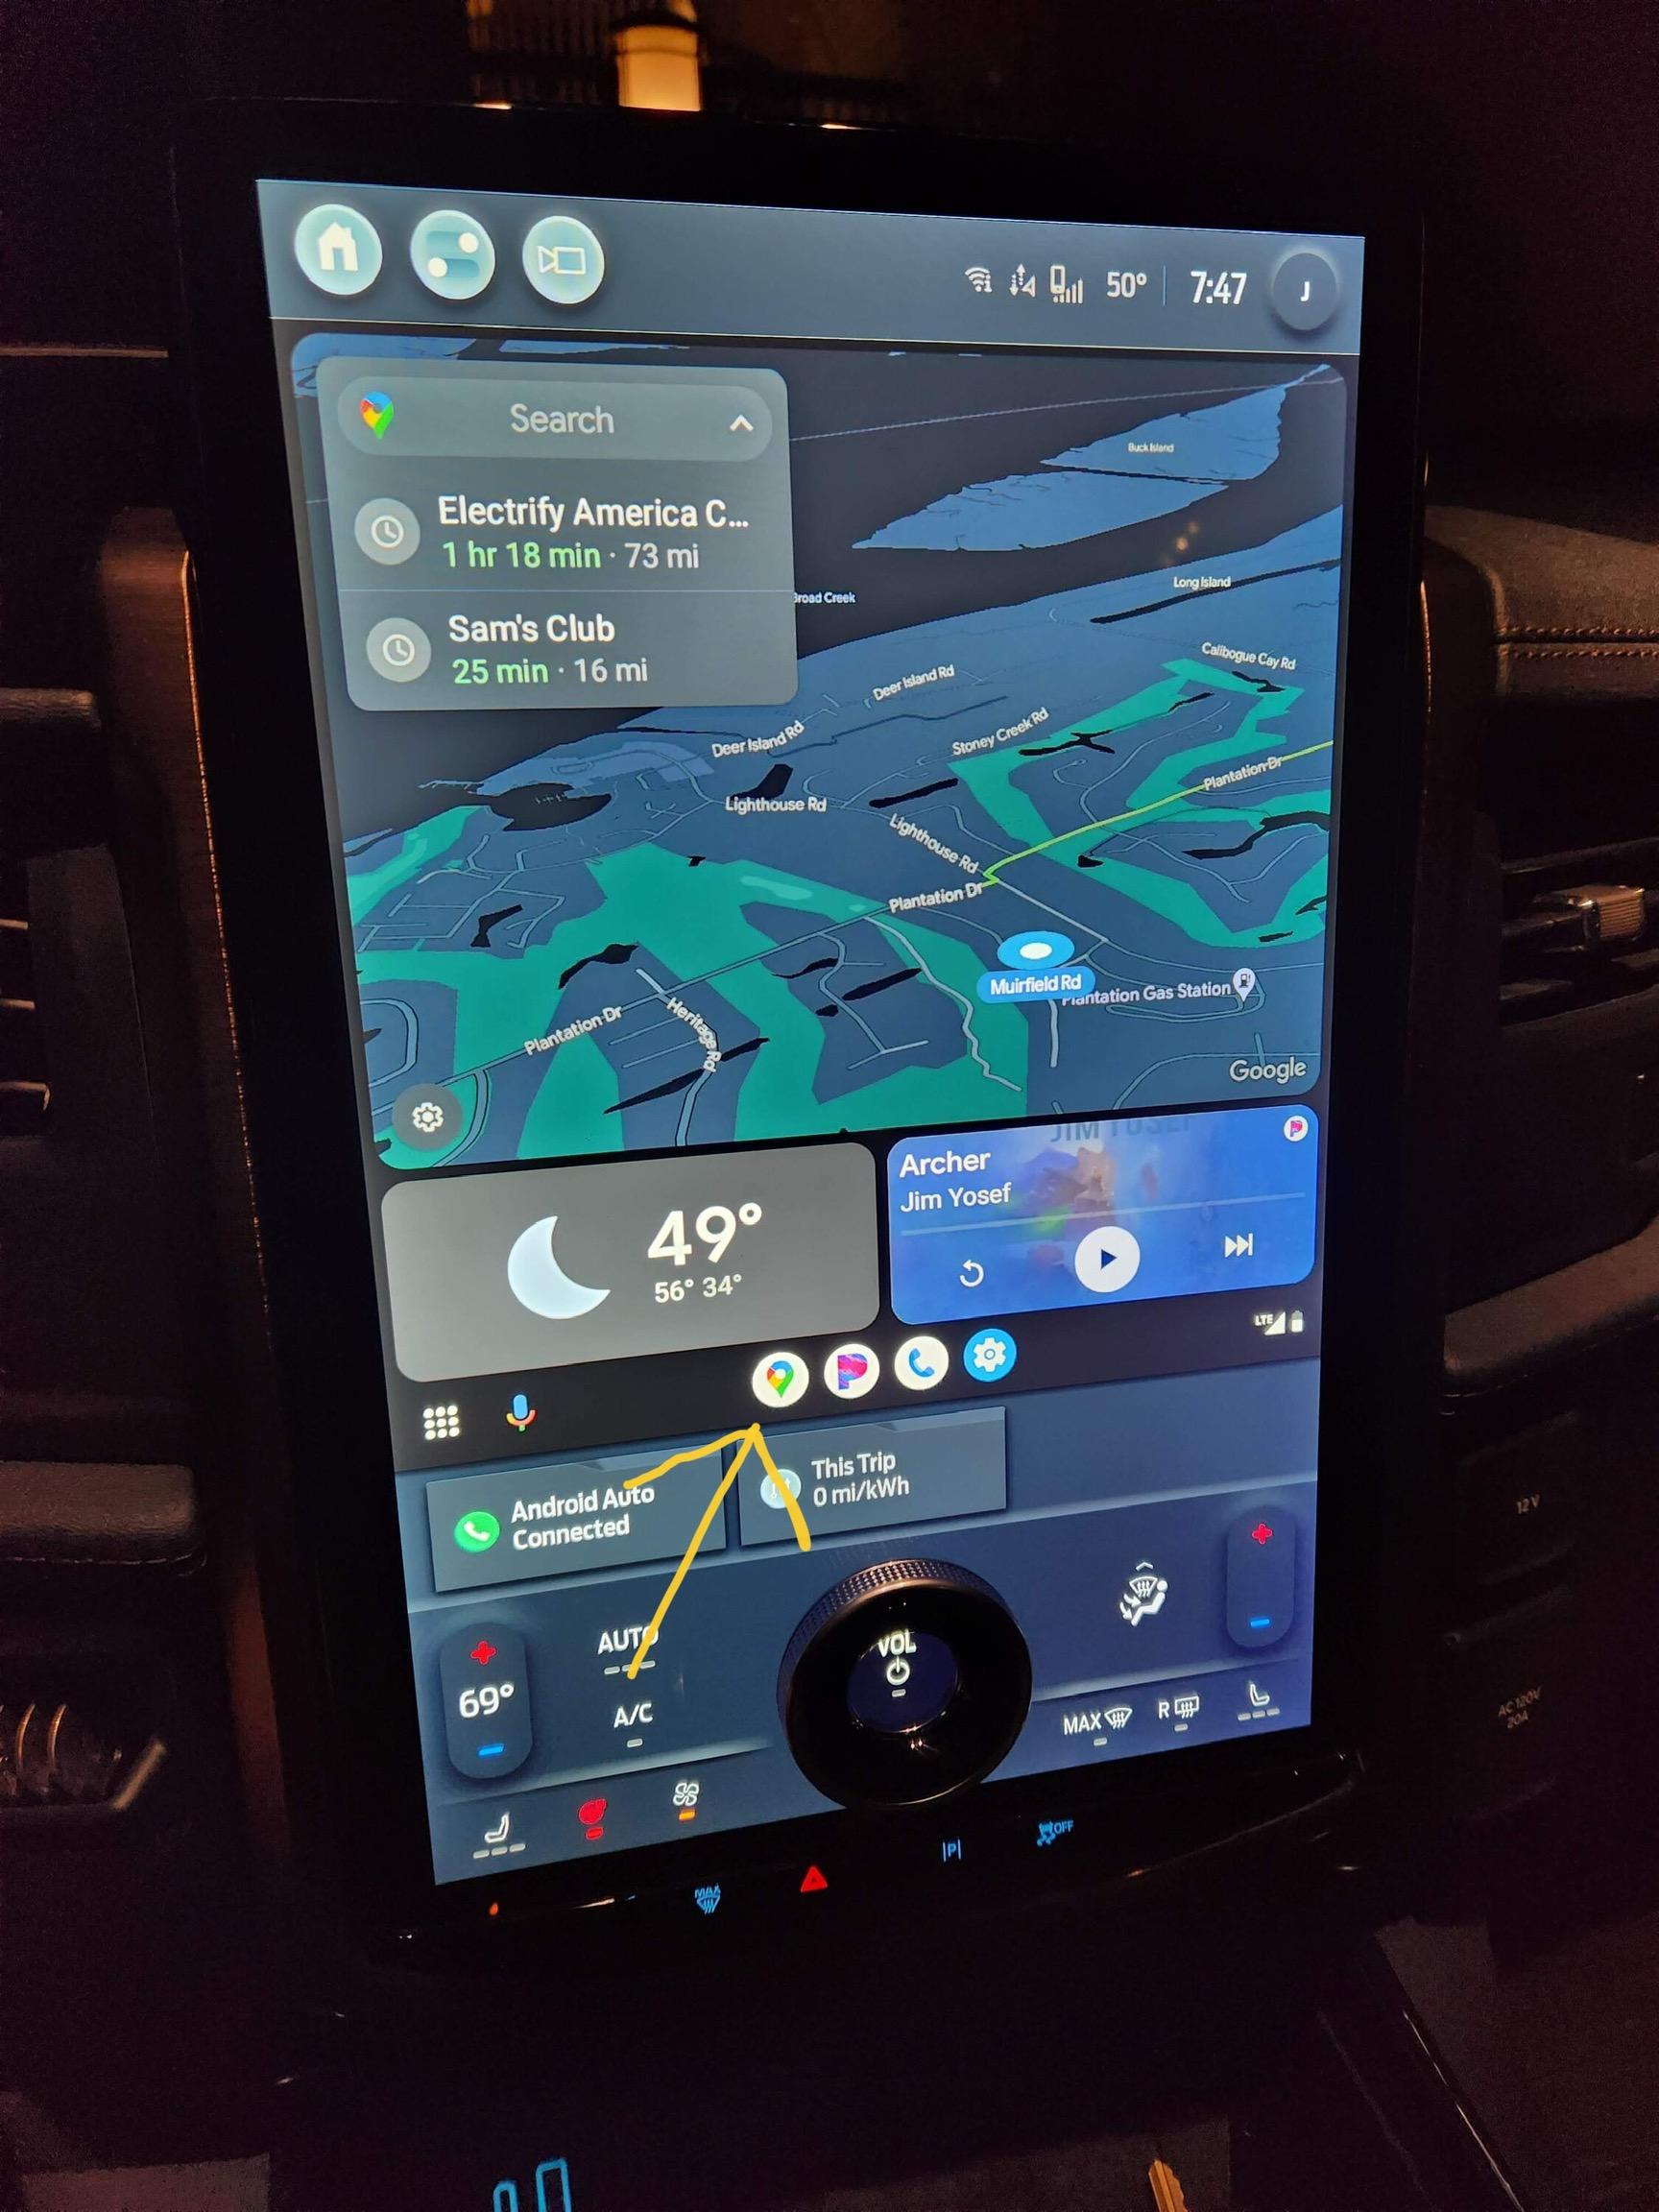 Ford F-150 Lightning How to get FullScreen Android Auto  i have the latest 4.1.1  Update B1670953-35DC-407D-888B-6F843D8A6A0C